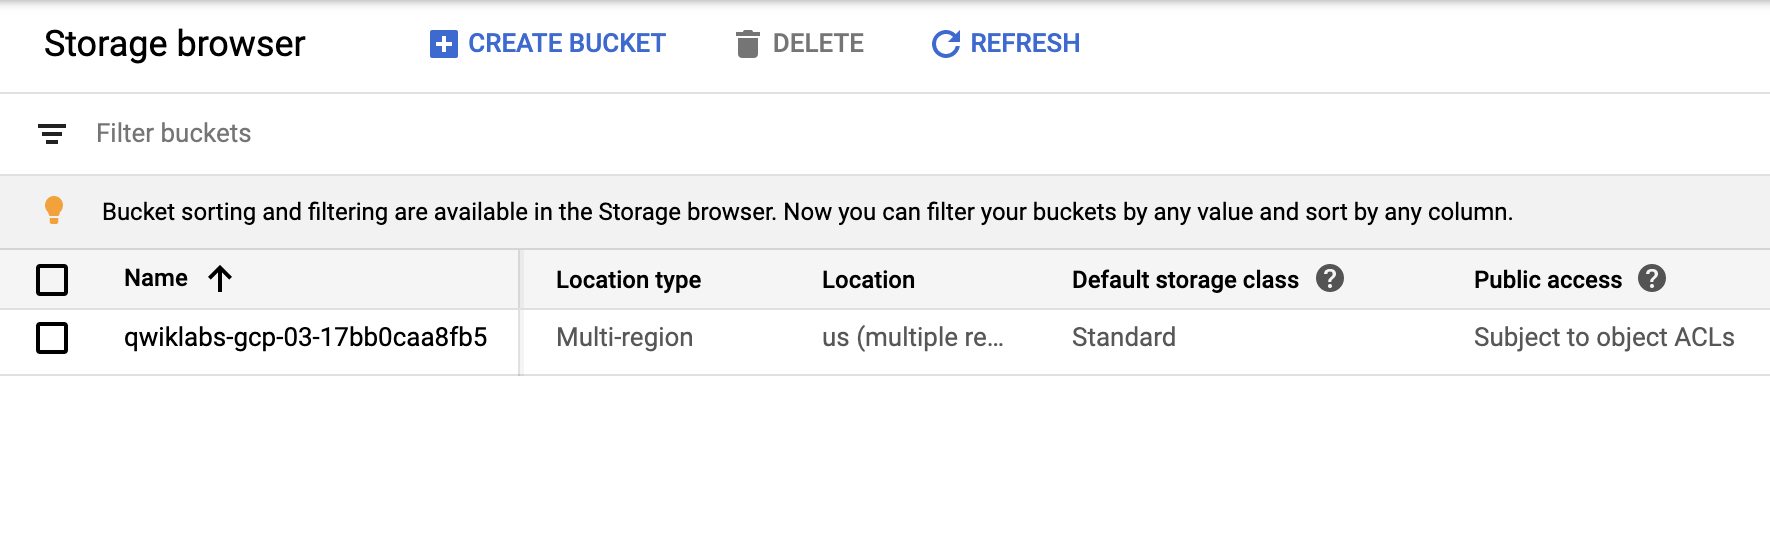 Storage browser containing the relevant bucket